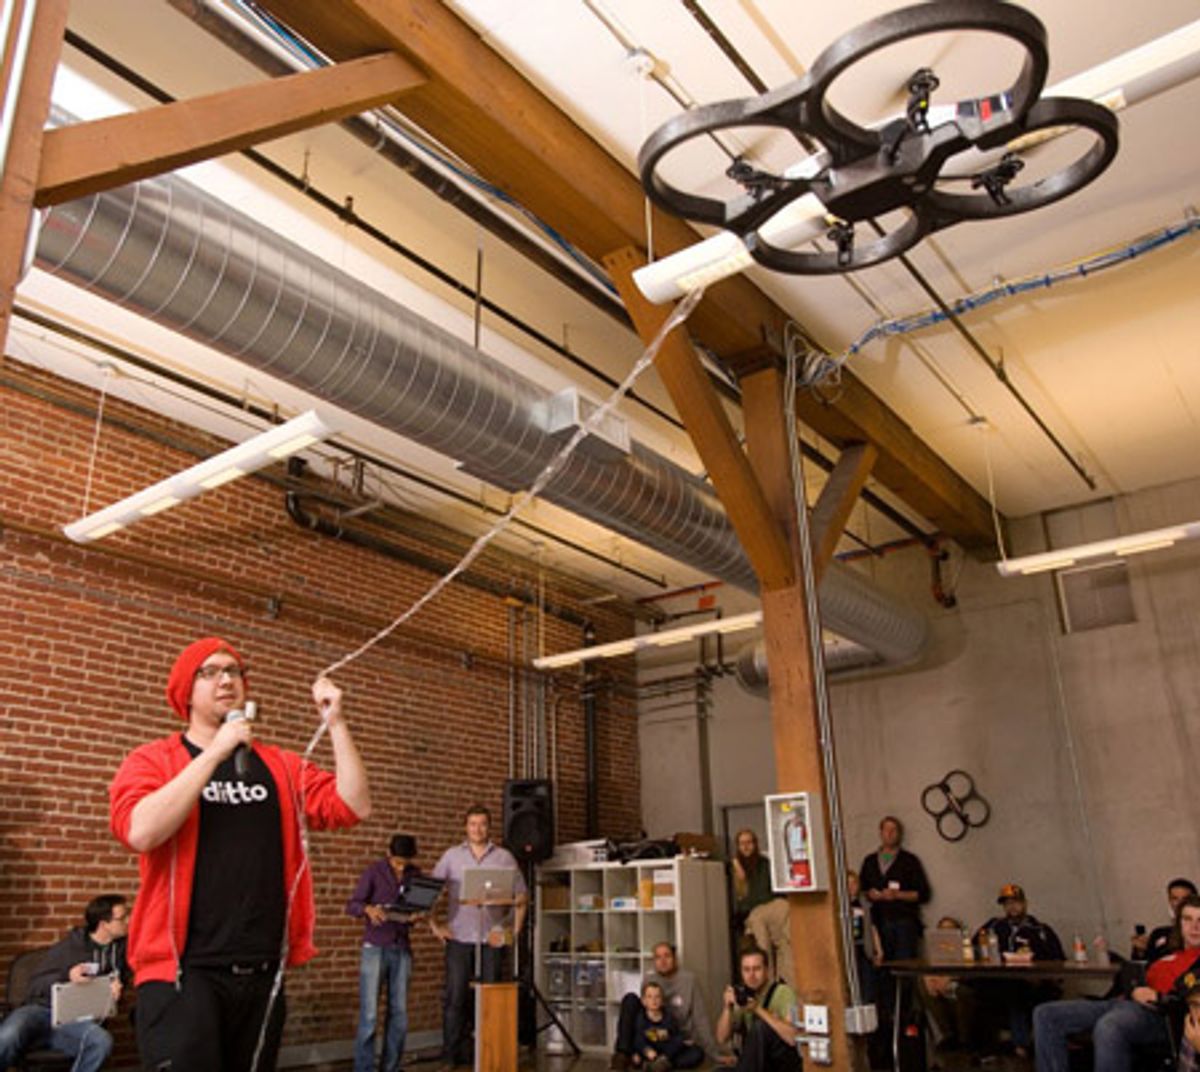 AR Drone That Infects Other Drones With Virus Wins DroneGames